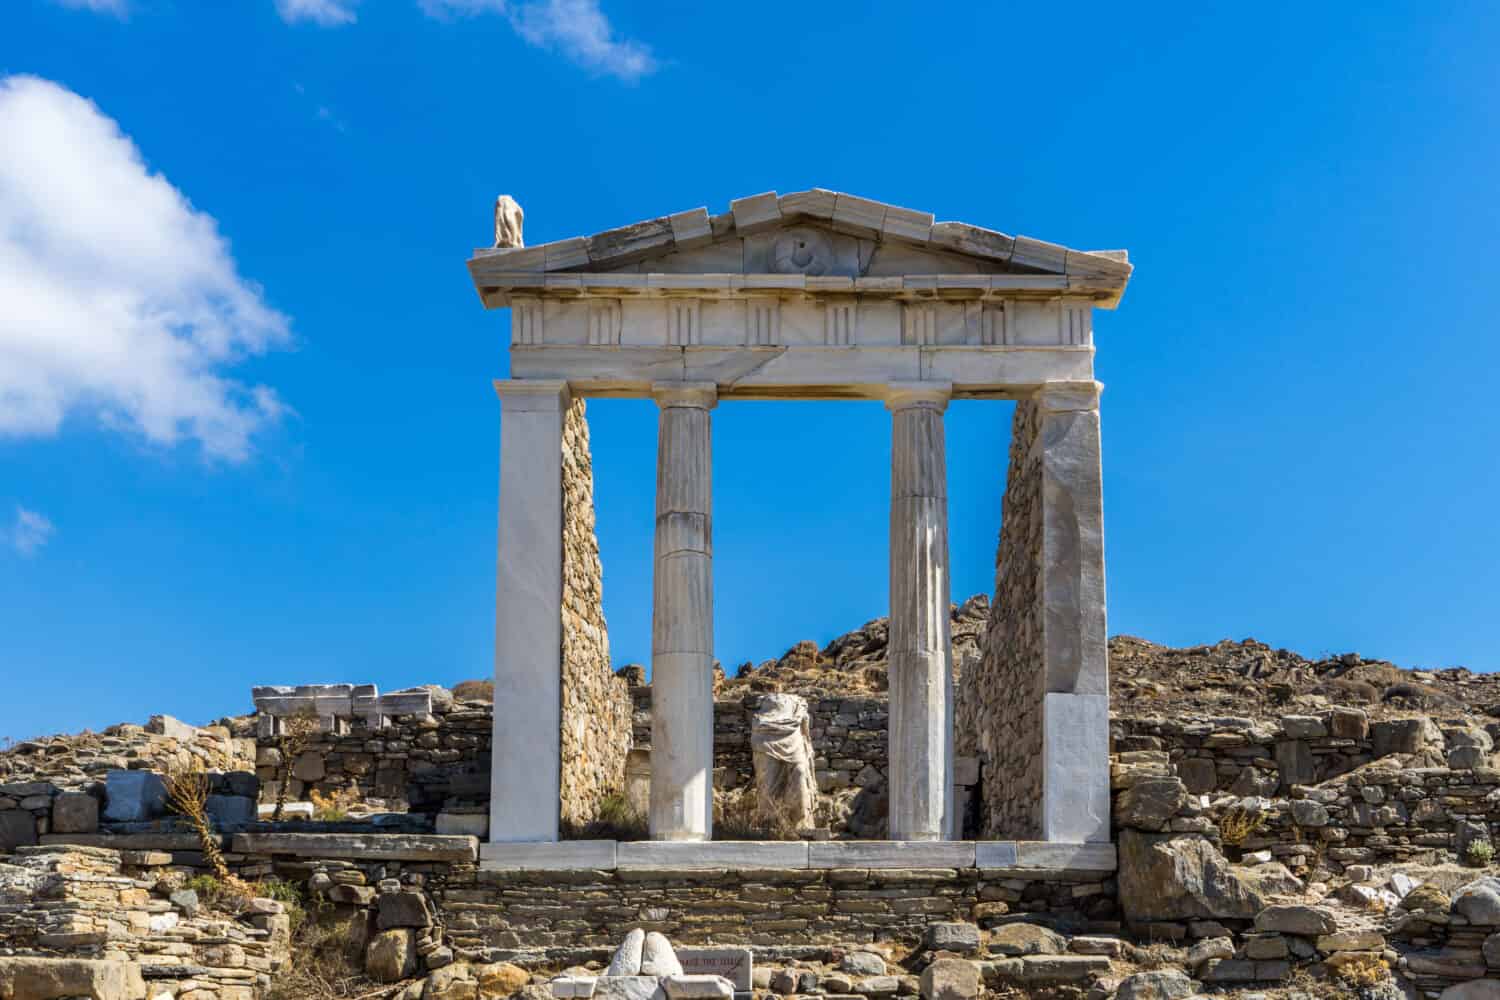 The ancient monuments and ruins on the sacred island of Delos, Greece. The birth place of god Apollo. 